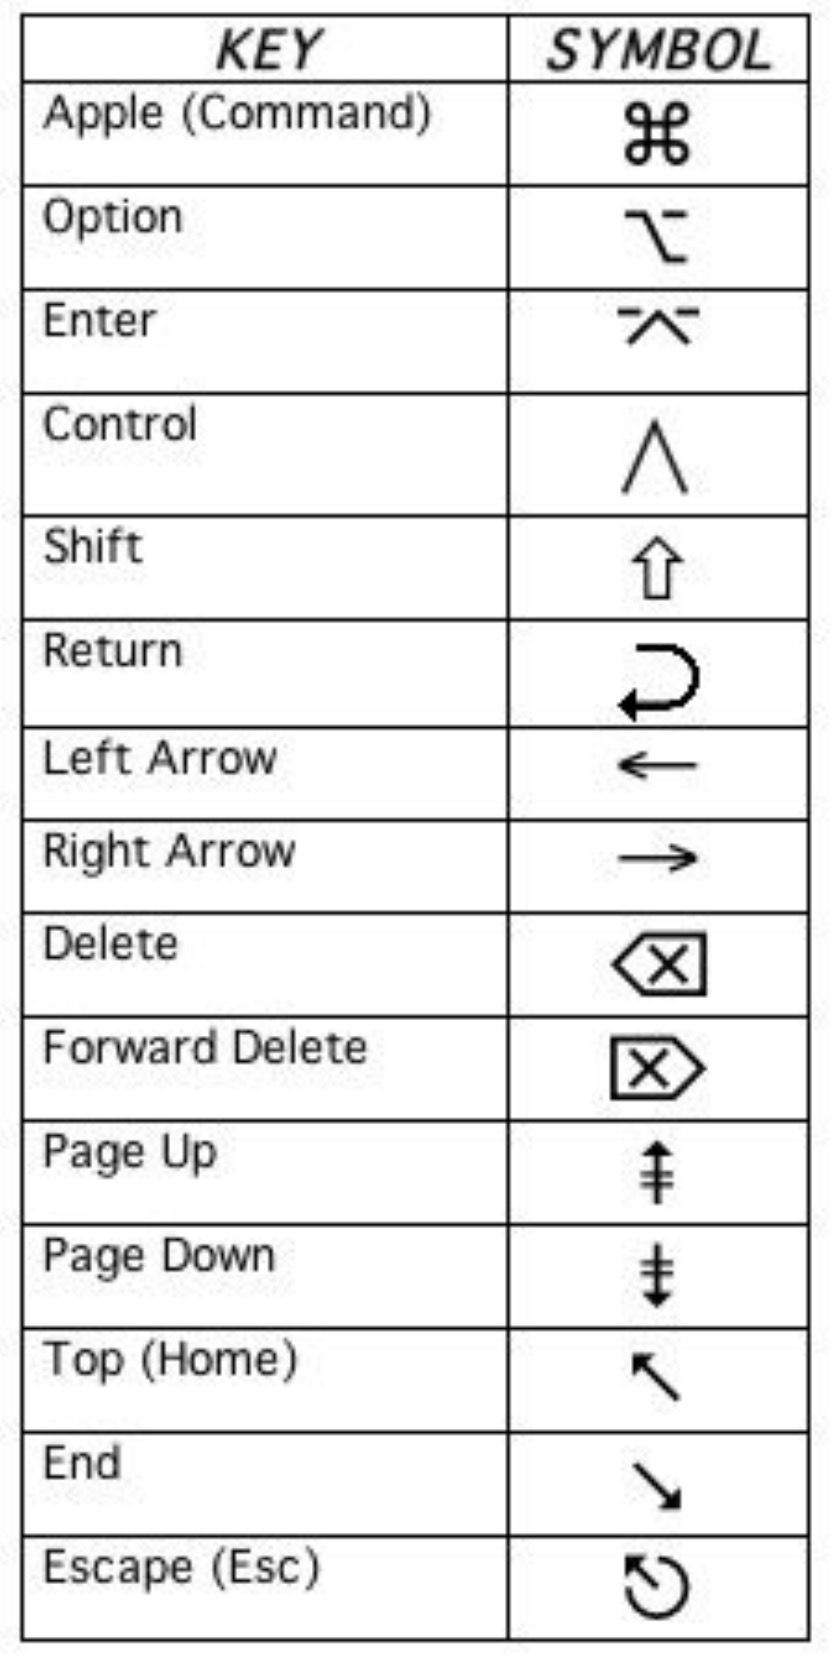 Keyboard commands for macbook air